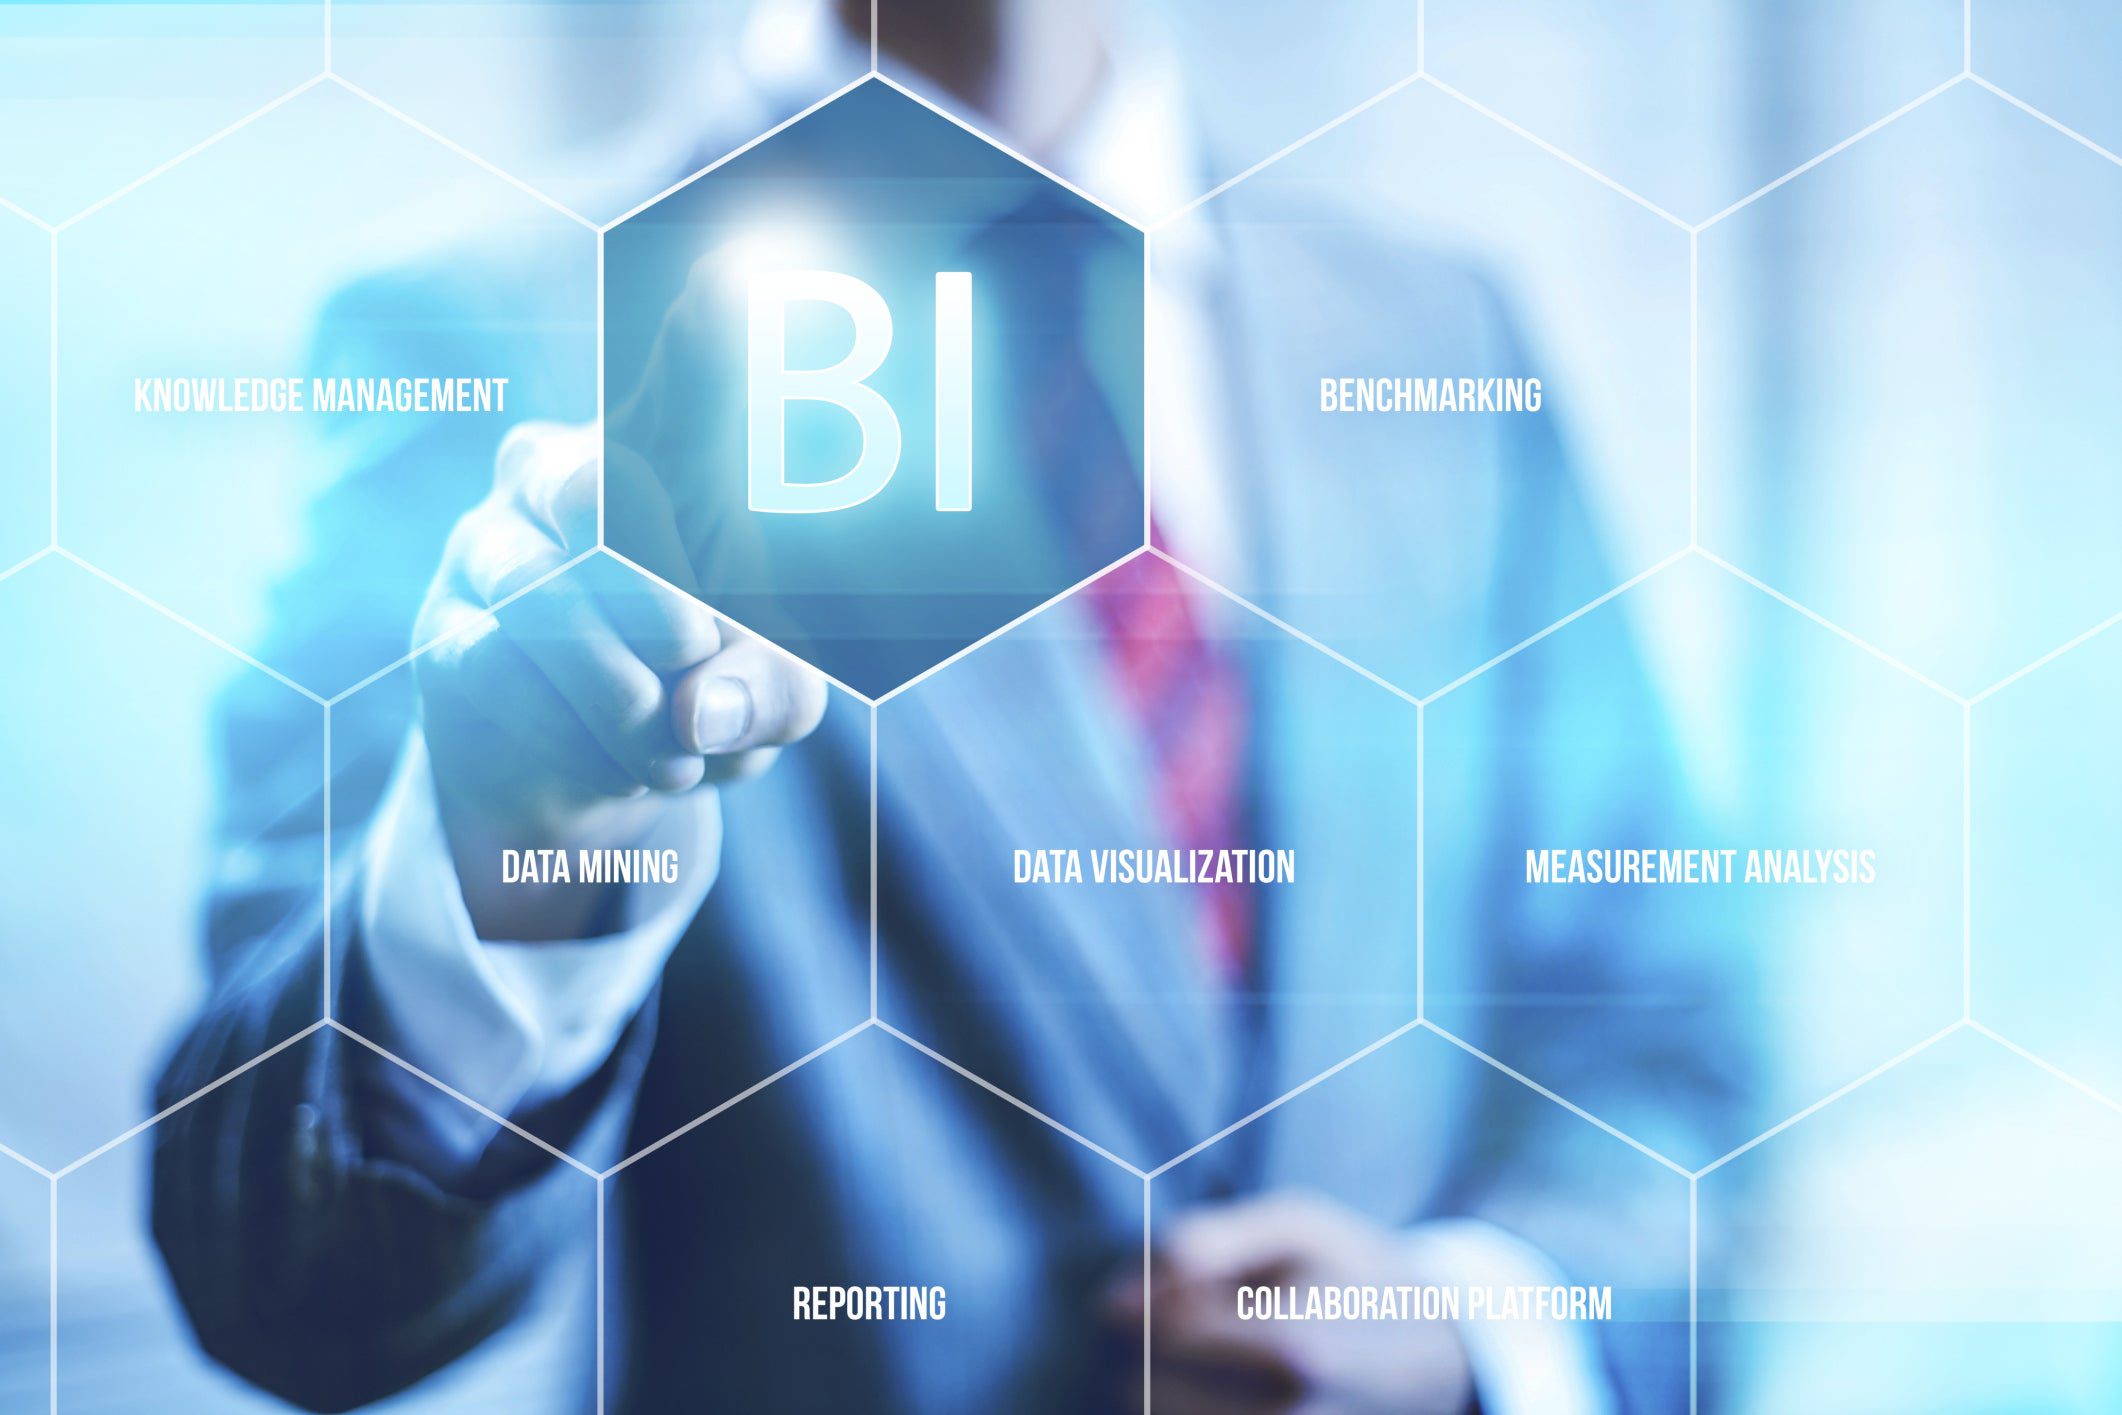 What are the responsibilities of a Business Intelligence Analyst?